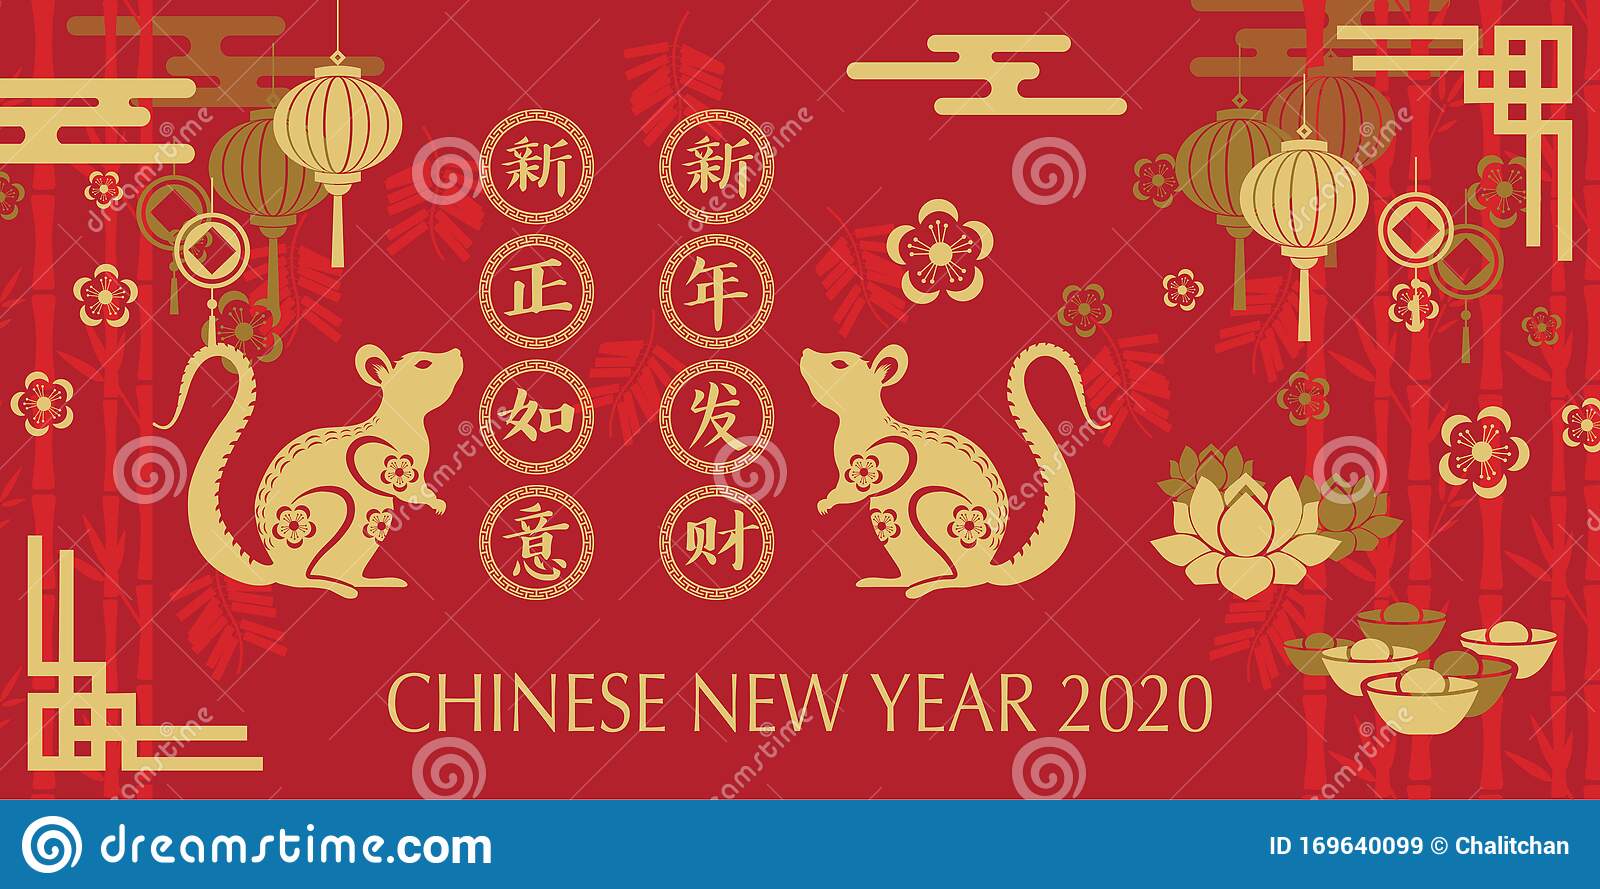 happy chinese new year mouse flat design characters mean considered lucky rich forever zodiac sign 1696400